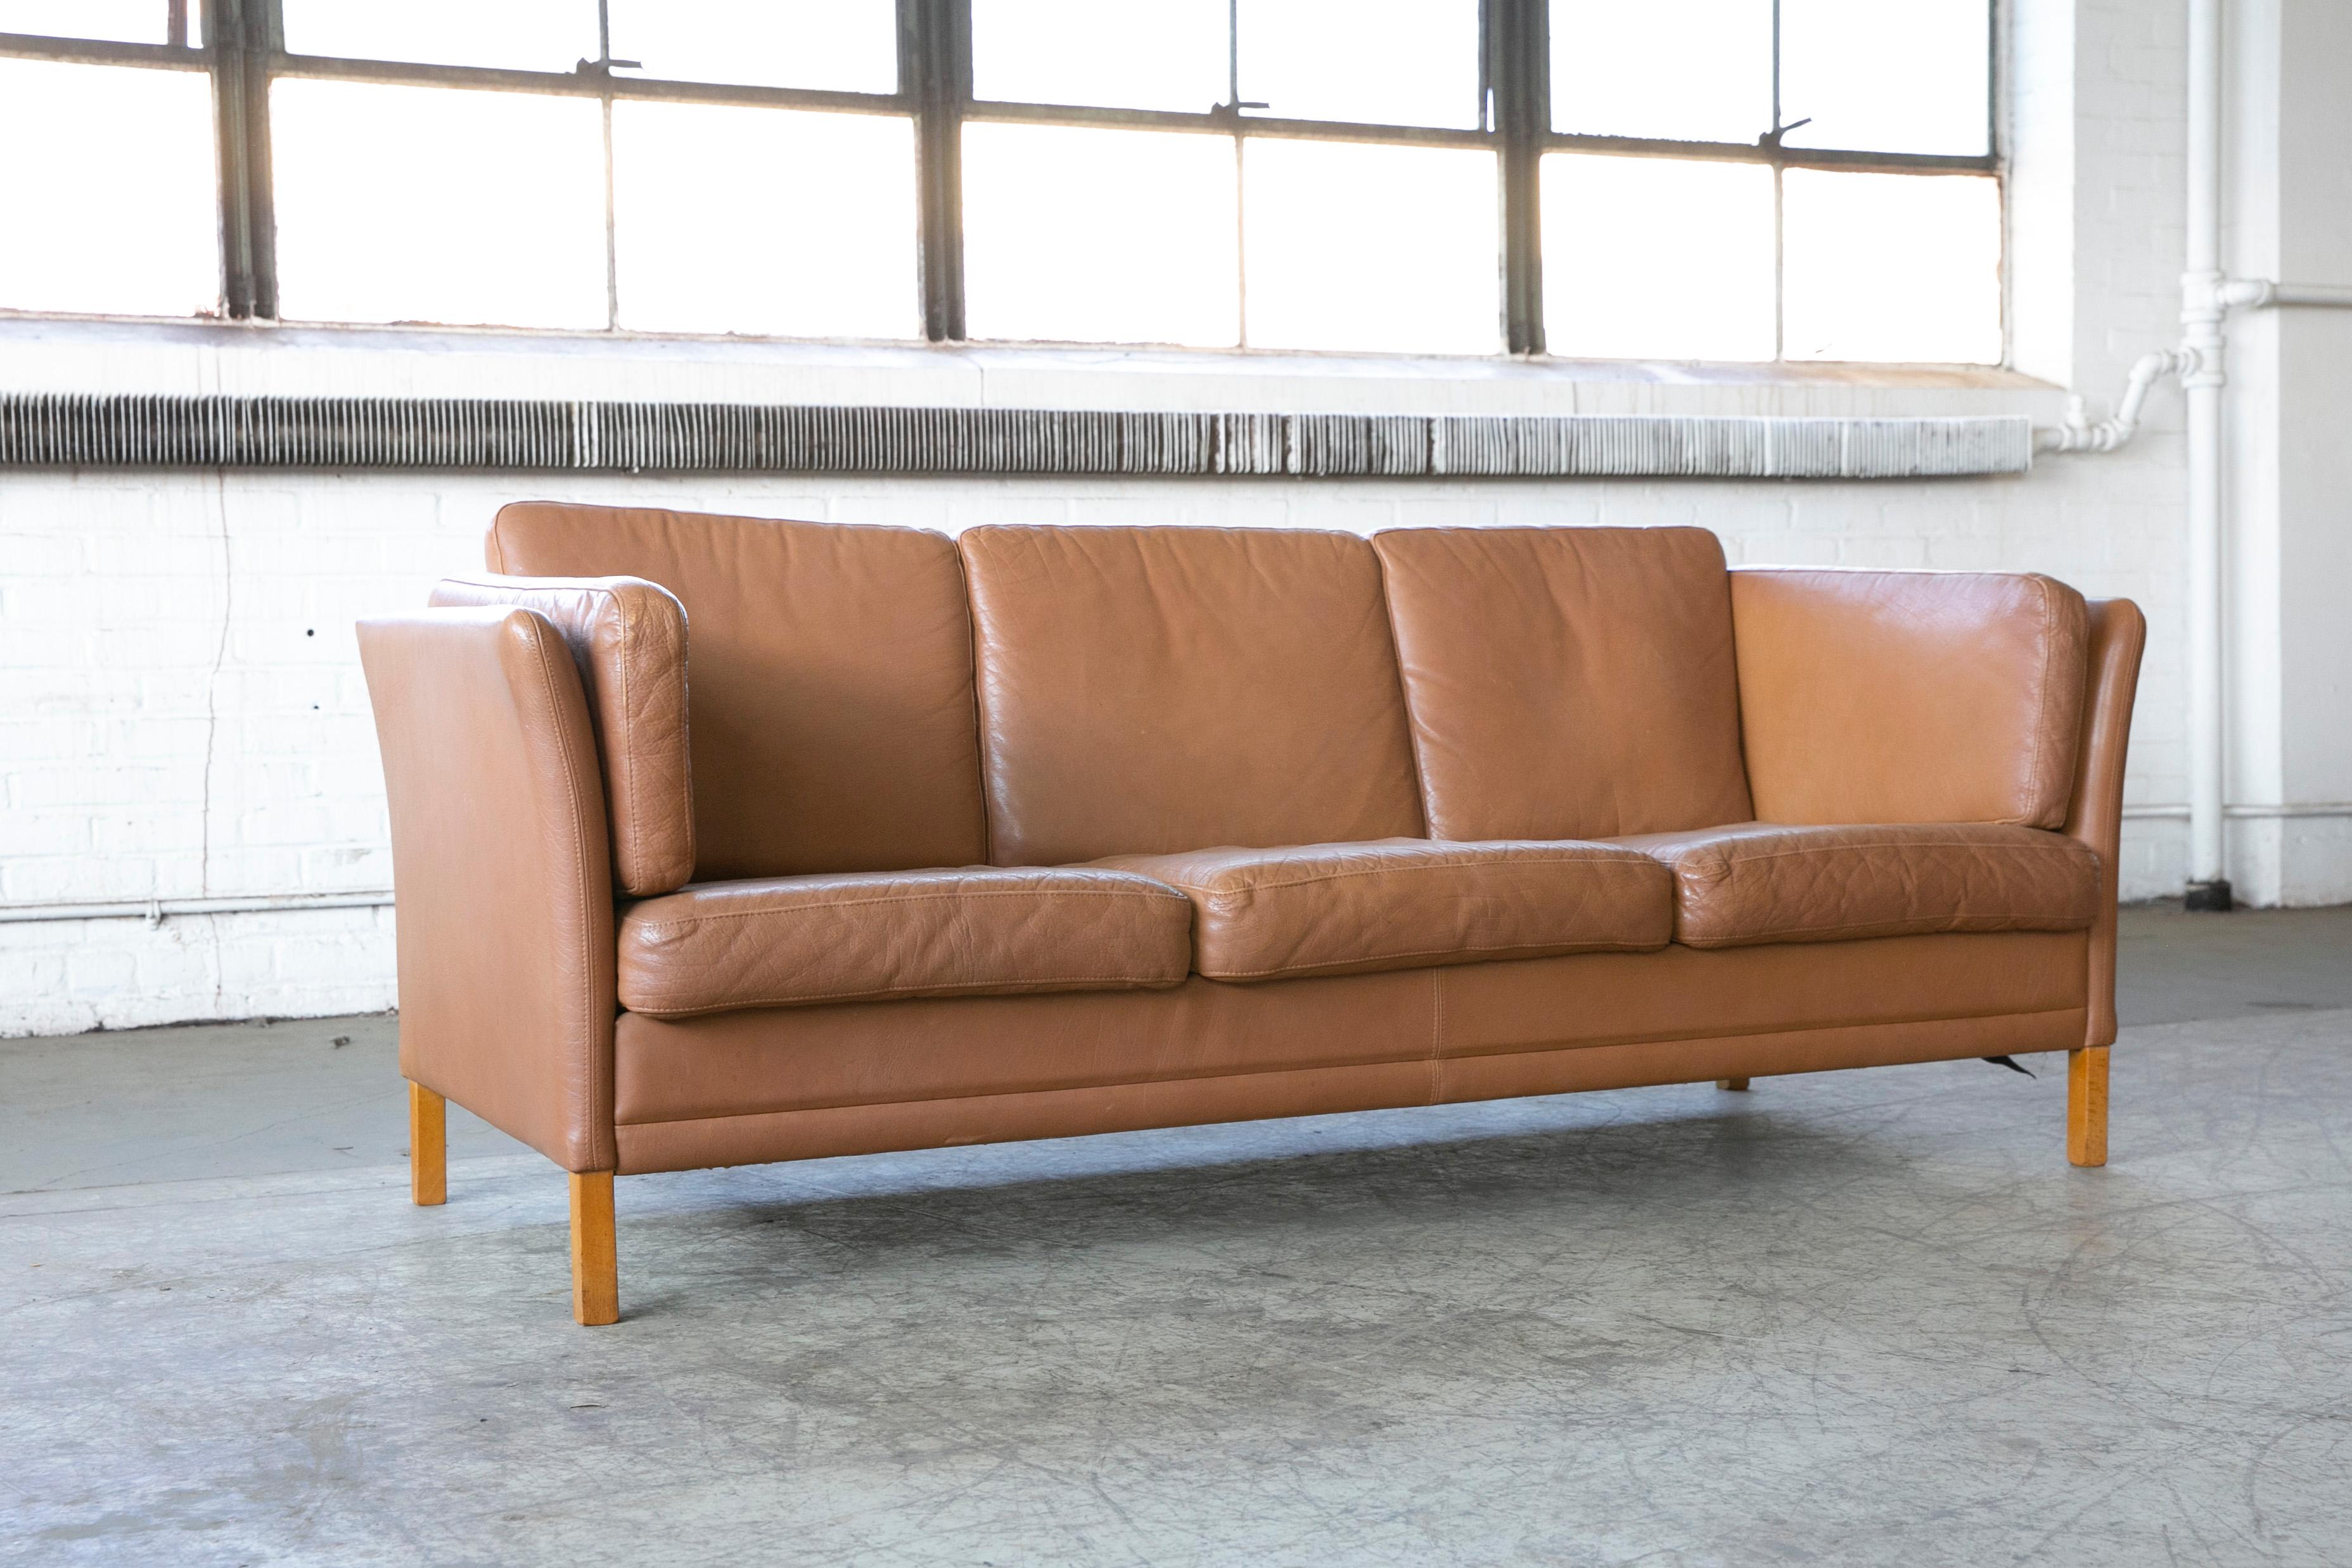 Late 20th Century Classic Danish Midcentury Sofa in Chestnut Colored Leather by Mogens Hansen